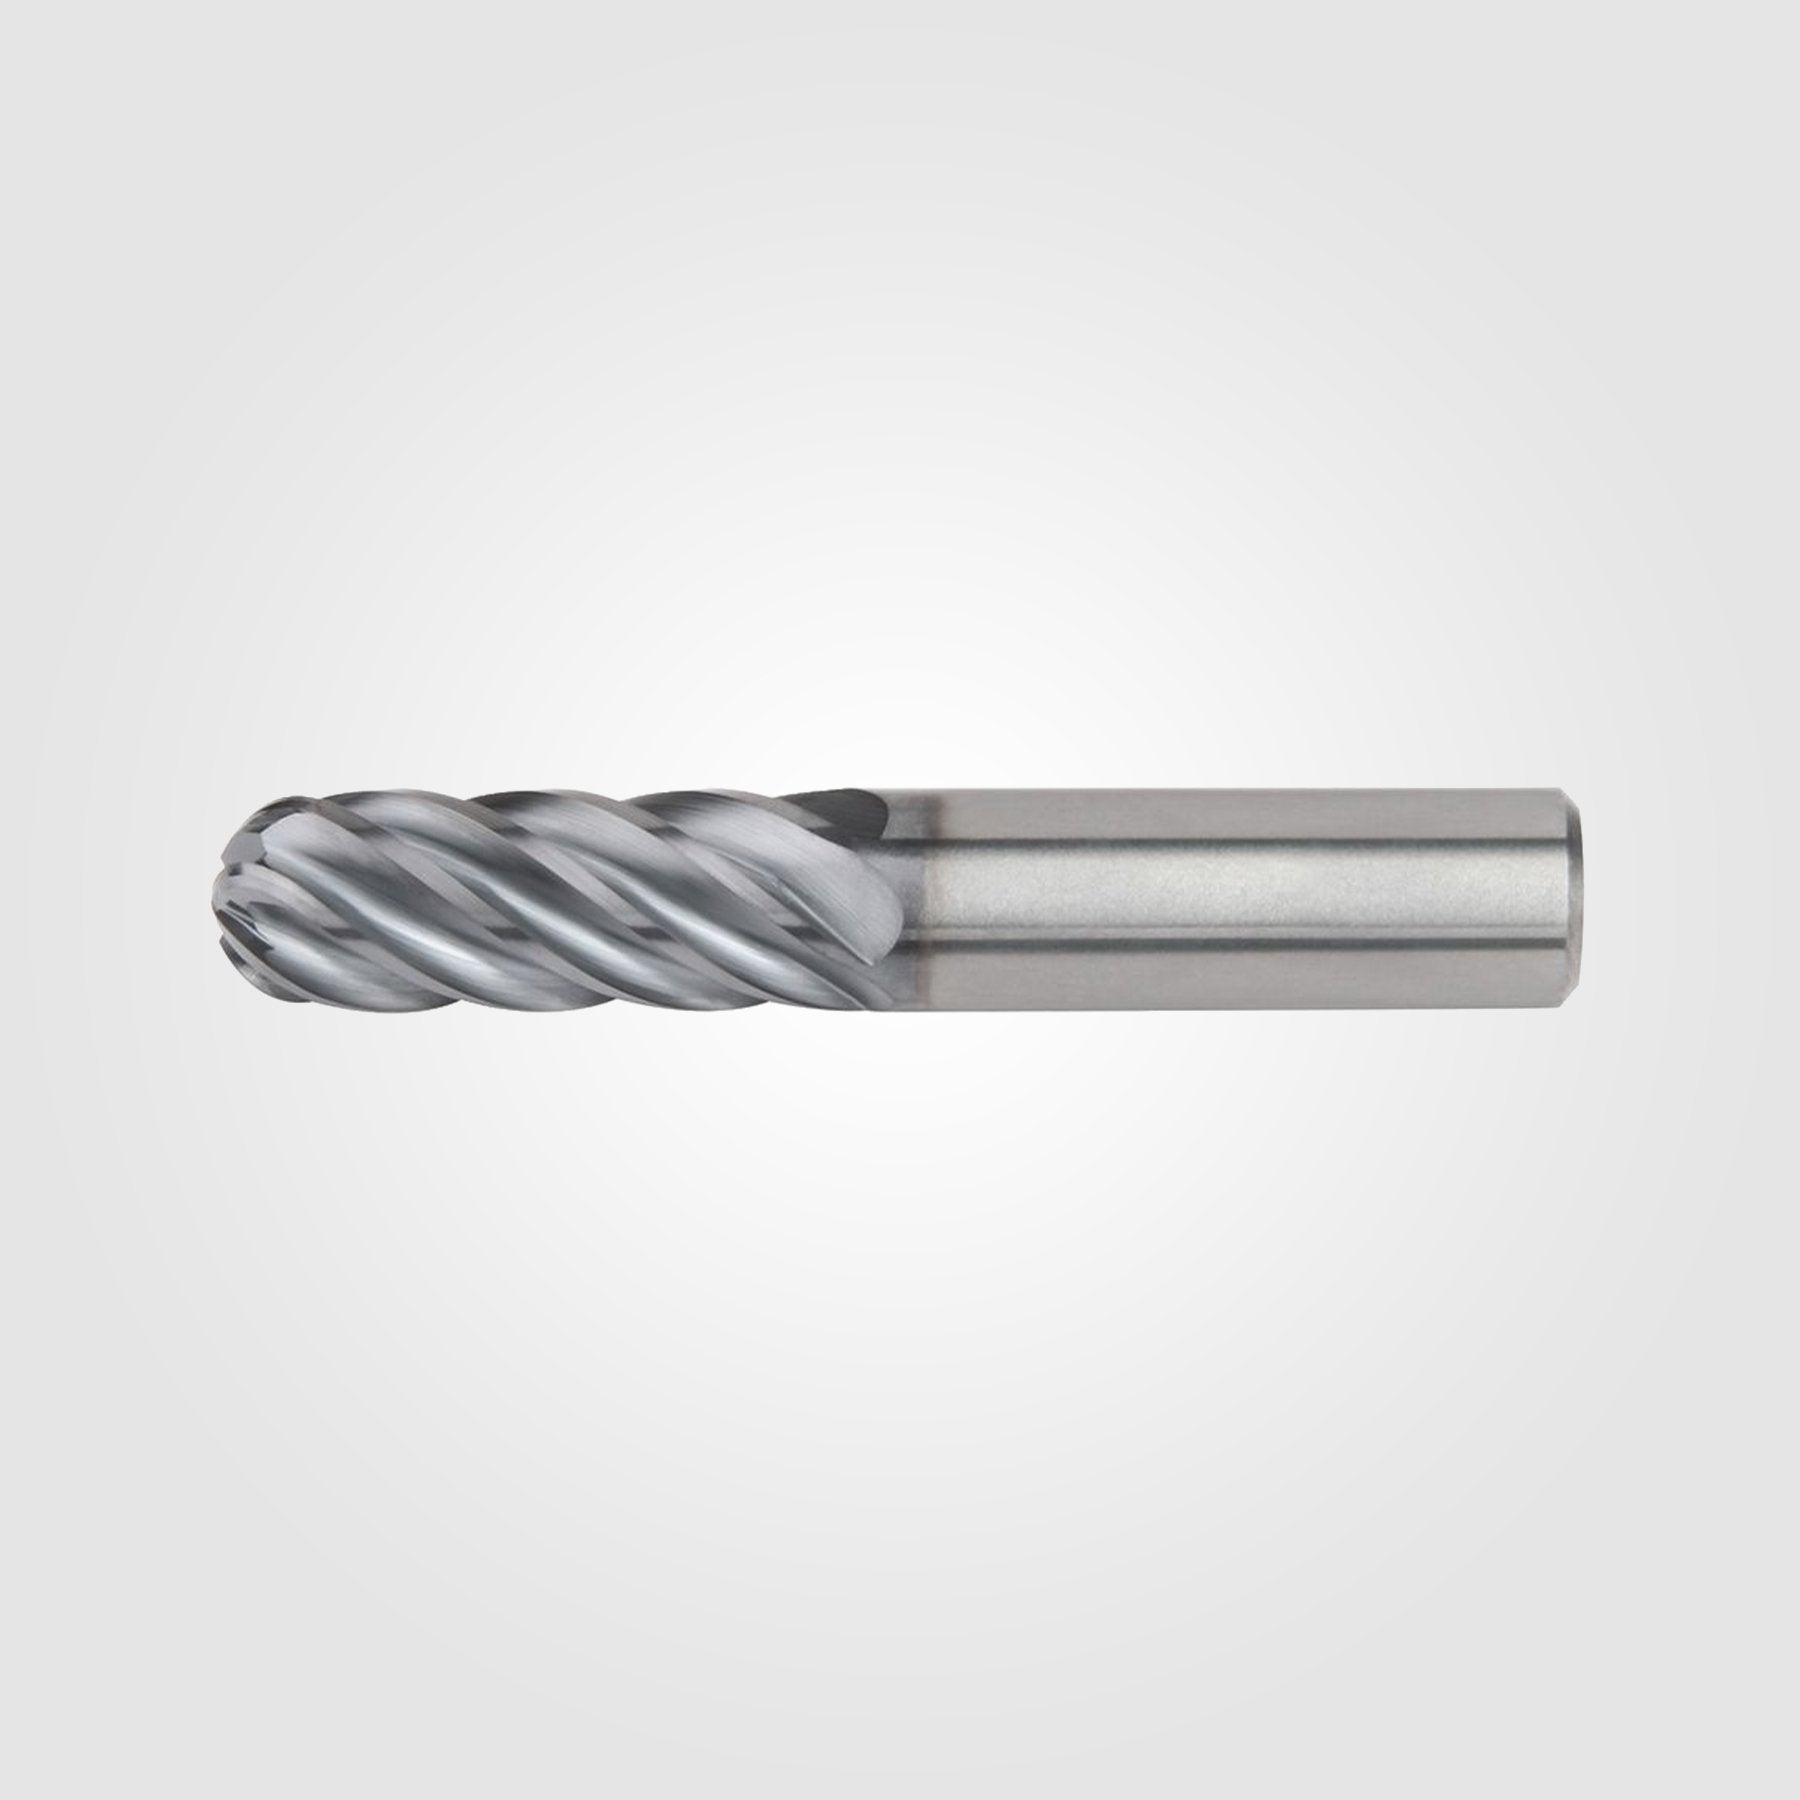 HARVI III (BALL NOSE AEROSPACE EXPANSION) | 3/4" x 3/4" x 4" x 6 1/2" | 6 FLUTE SOLID CARBIDE ENDMILL | 6113328